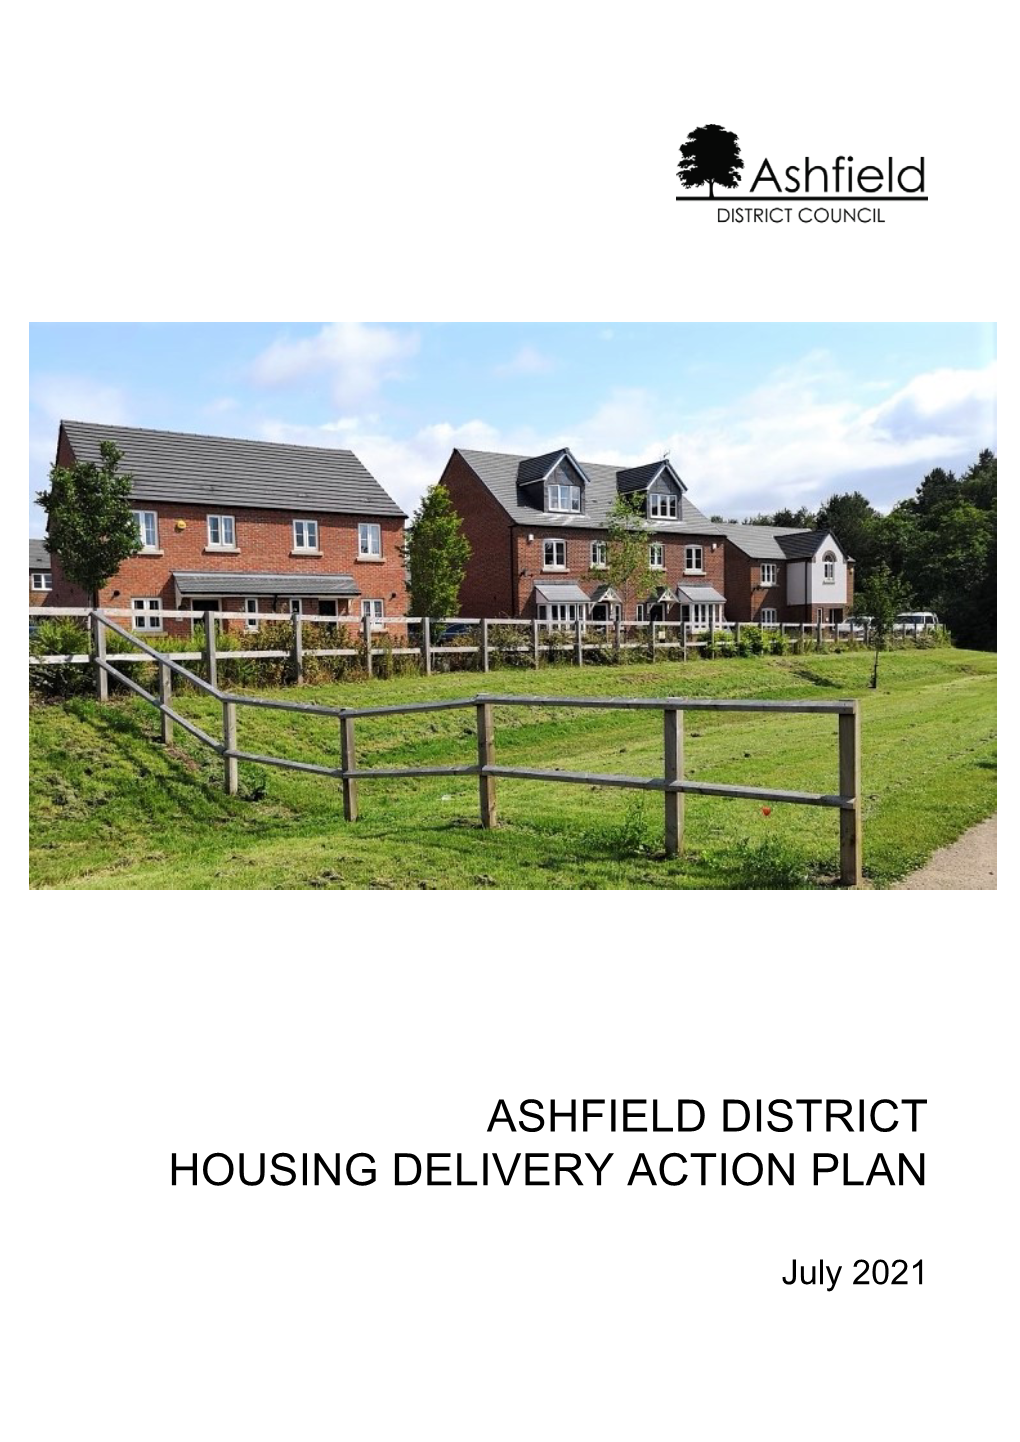 Ashfield Housing Delivery Action Plan 2021